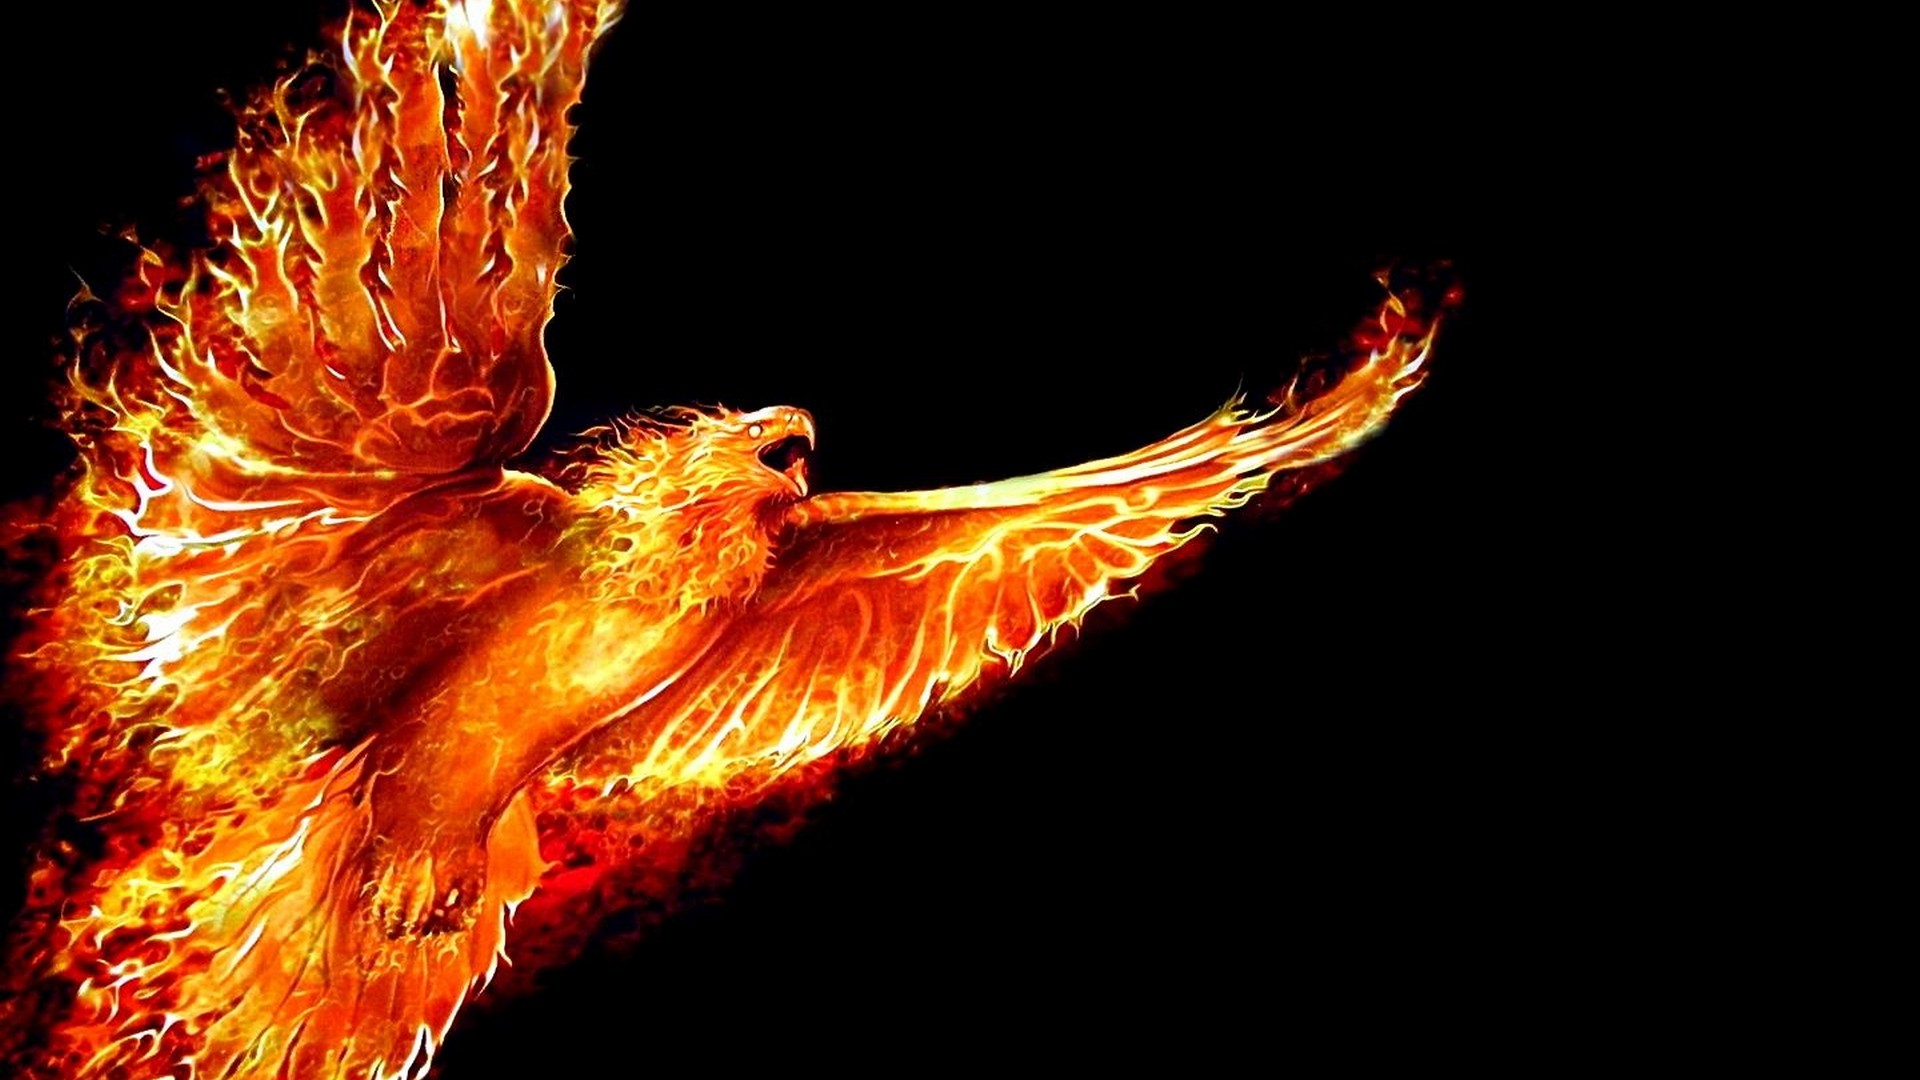 Phoenix Background Wallpaper HD With Resolution 1920X1080 pixel. You can make this wallpaper for your Desktop Computer Backgrounds, Mac Wallpapers, Android Lock screen or iPhone Screensavers